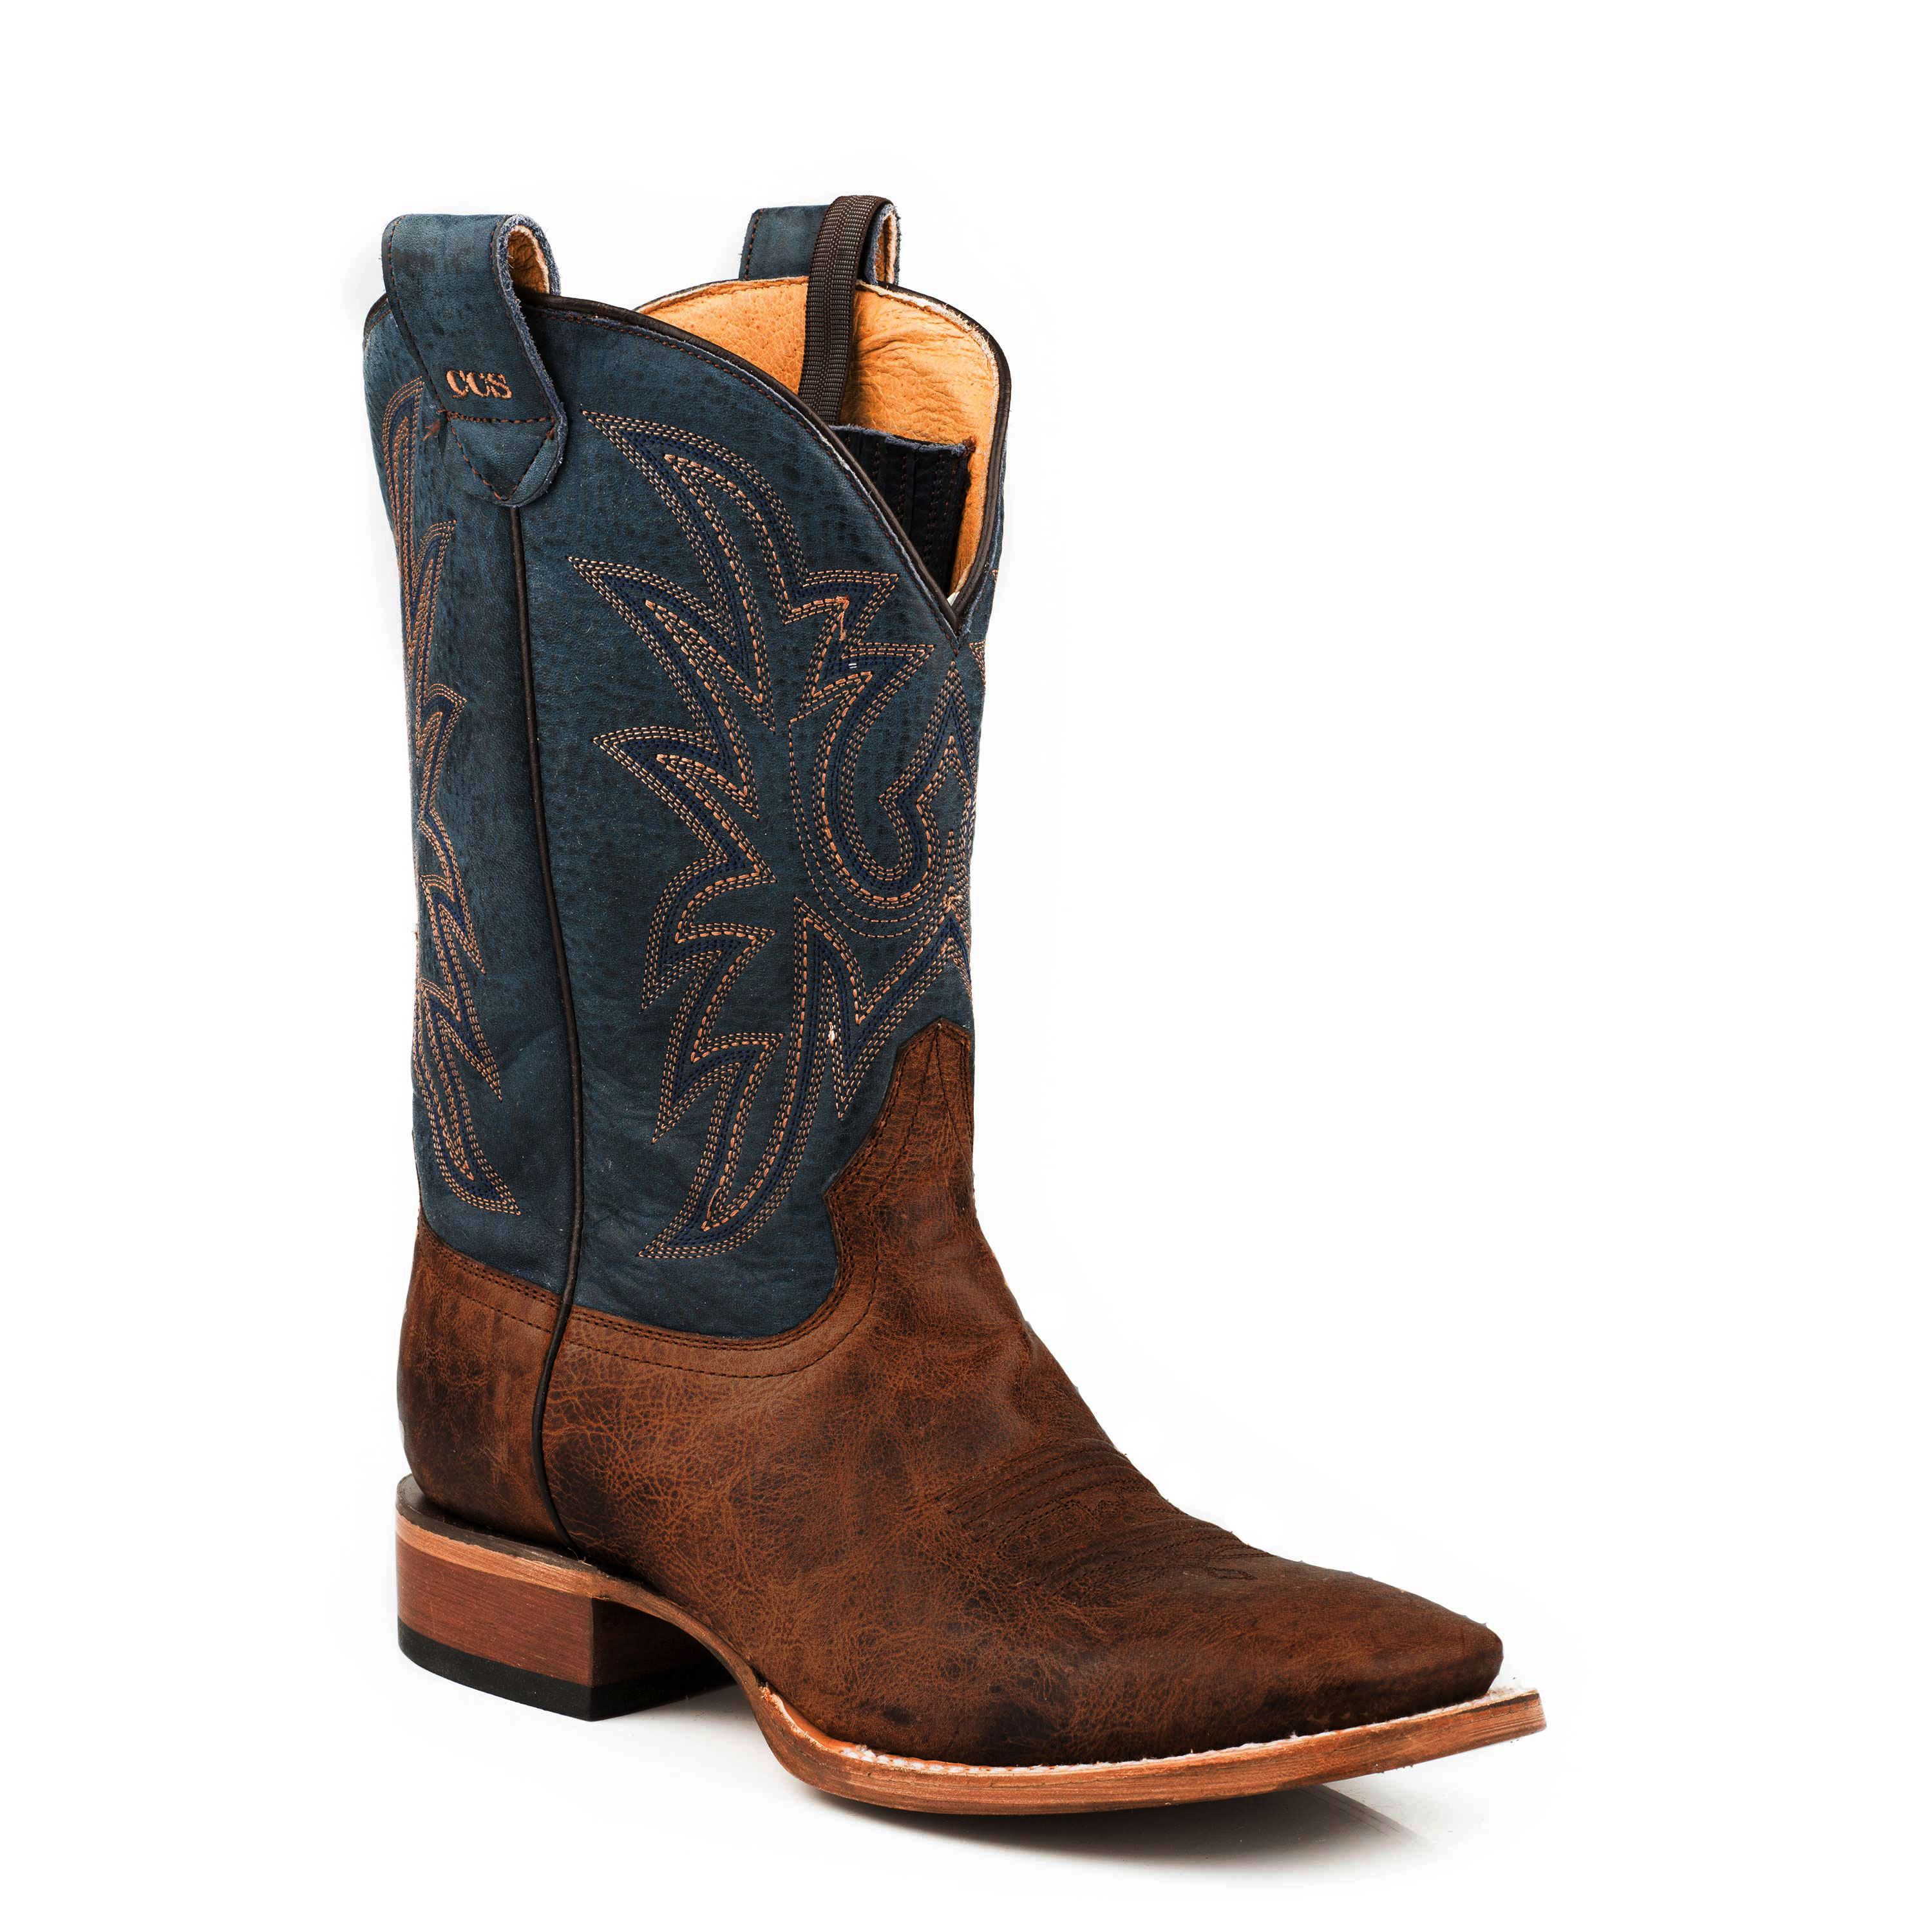 Pierce Concealed Carry Boots - Crater 